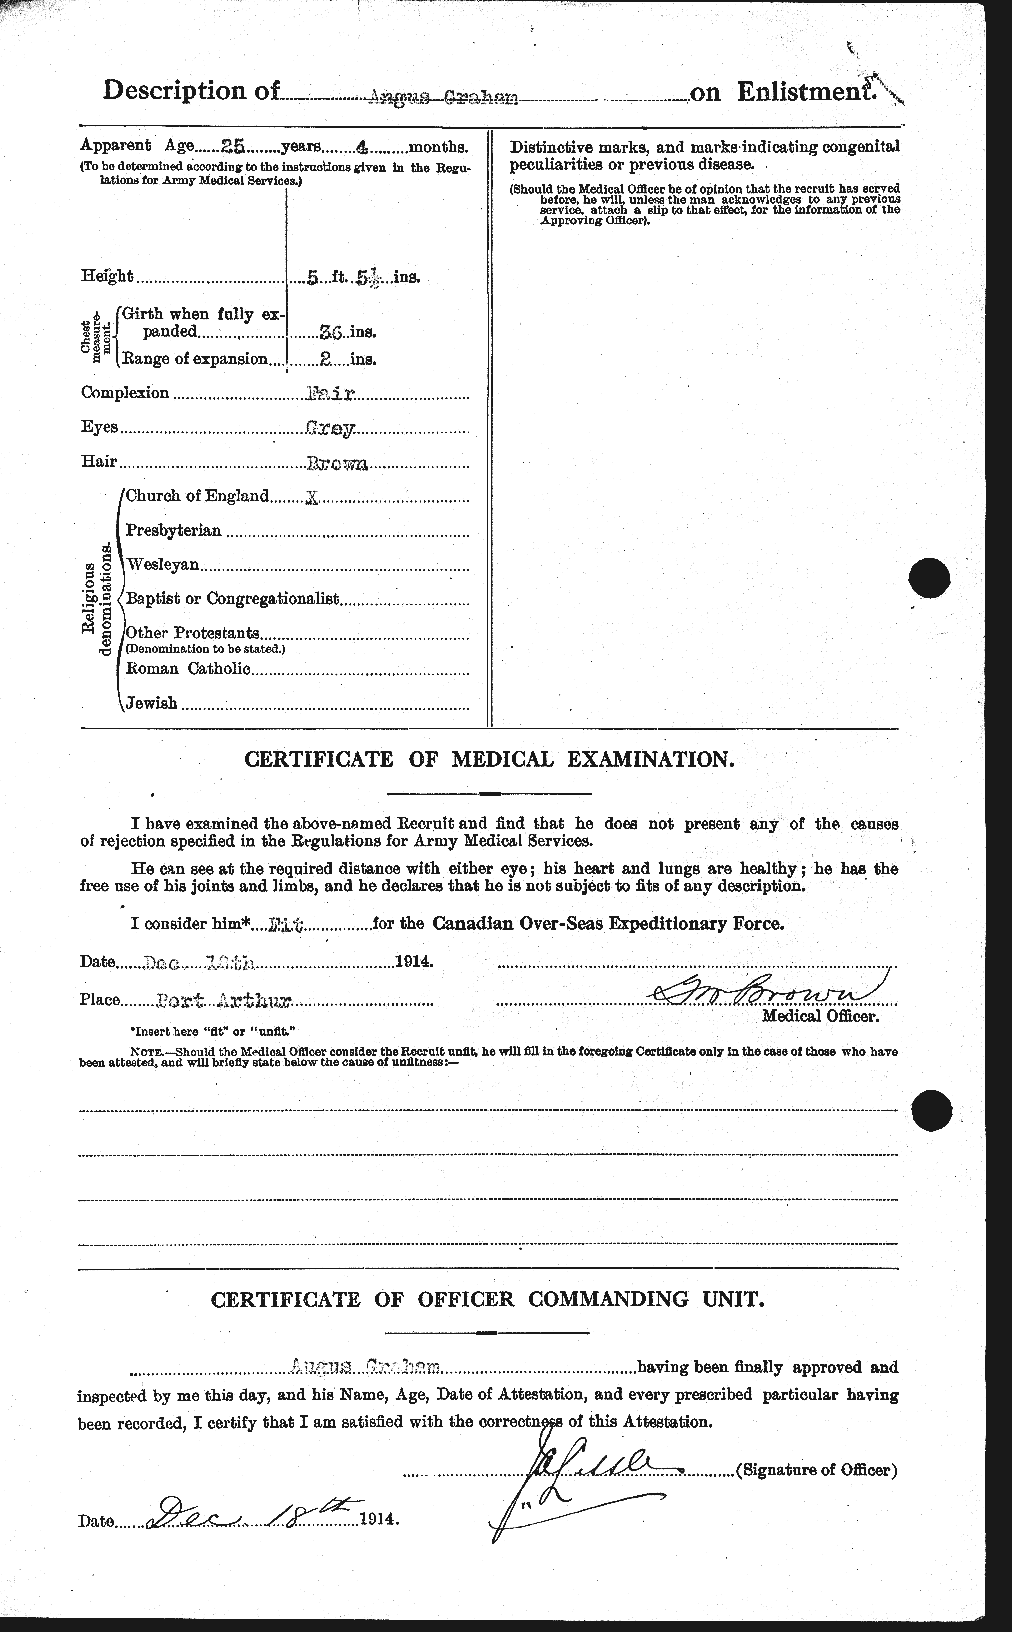 Personnel Records of the First World War - CEF 359620b